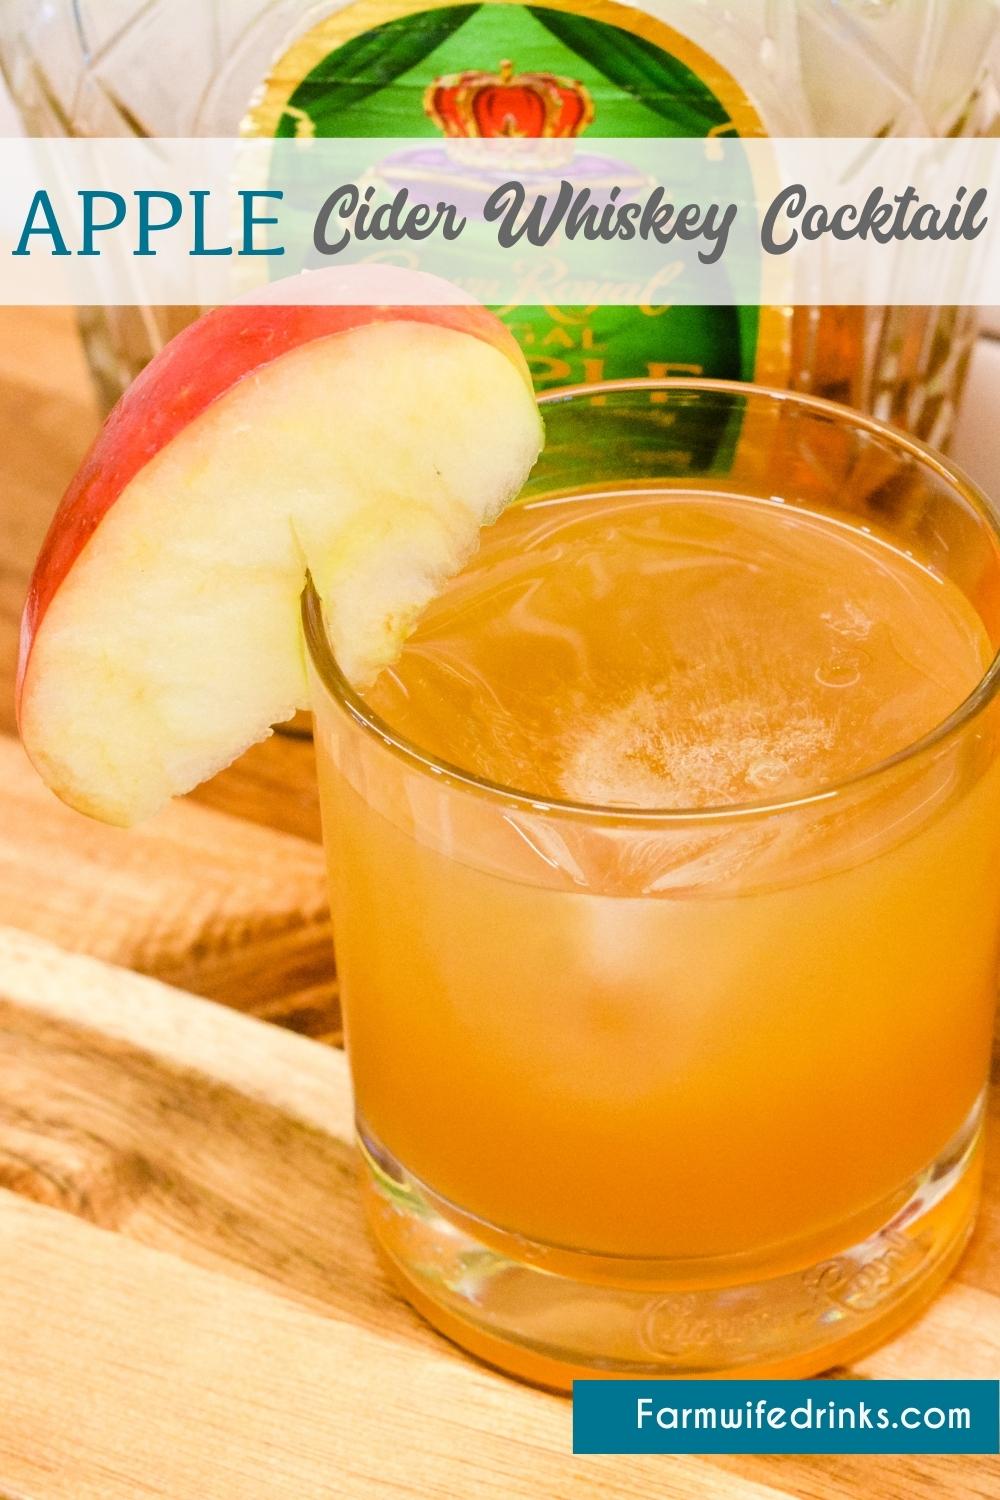 Apple cider whiskey cocktail is a simple 2-ingredient drink made with apple cider and Crown Royal Apple Whiskey.